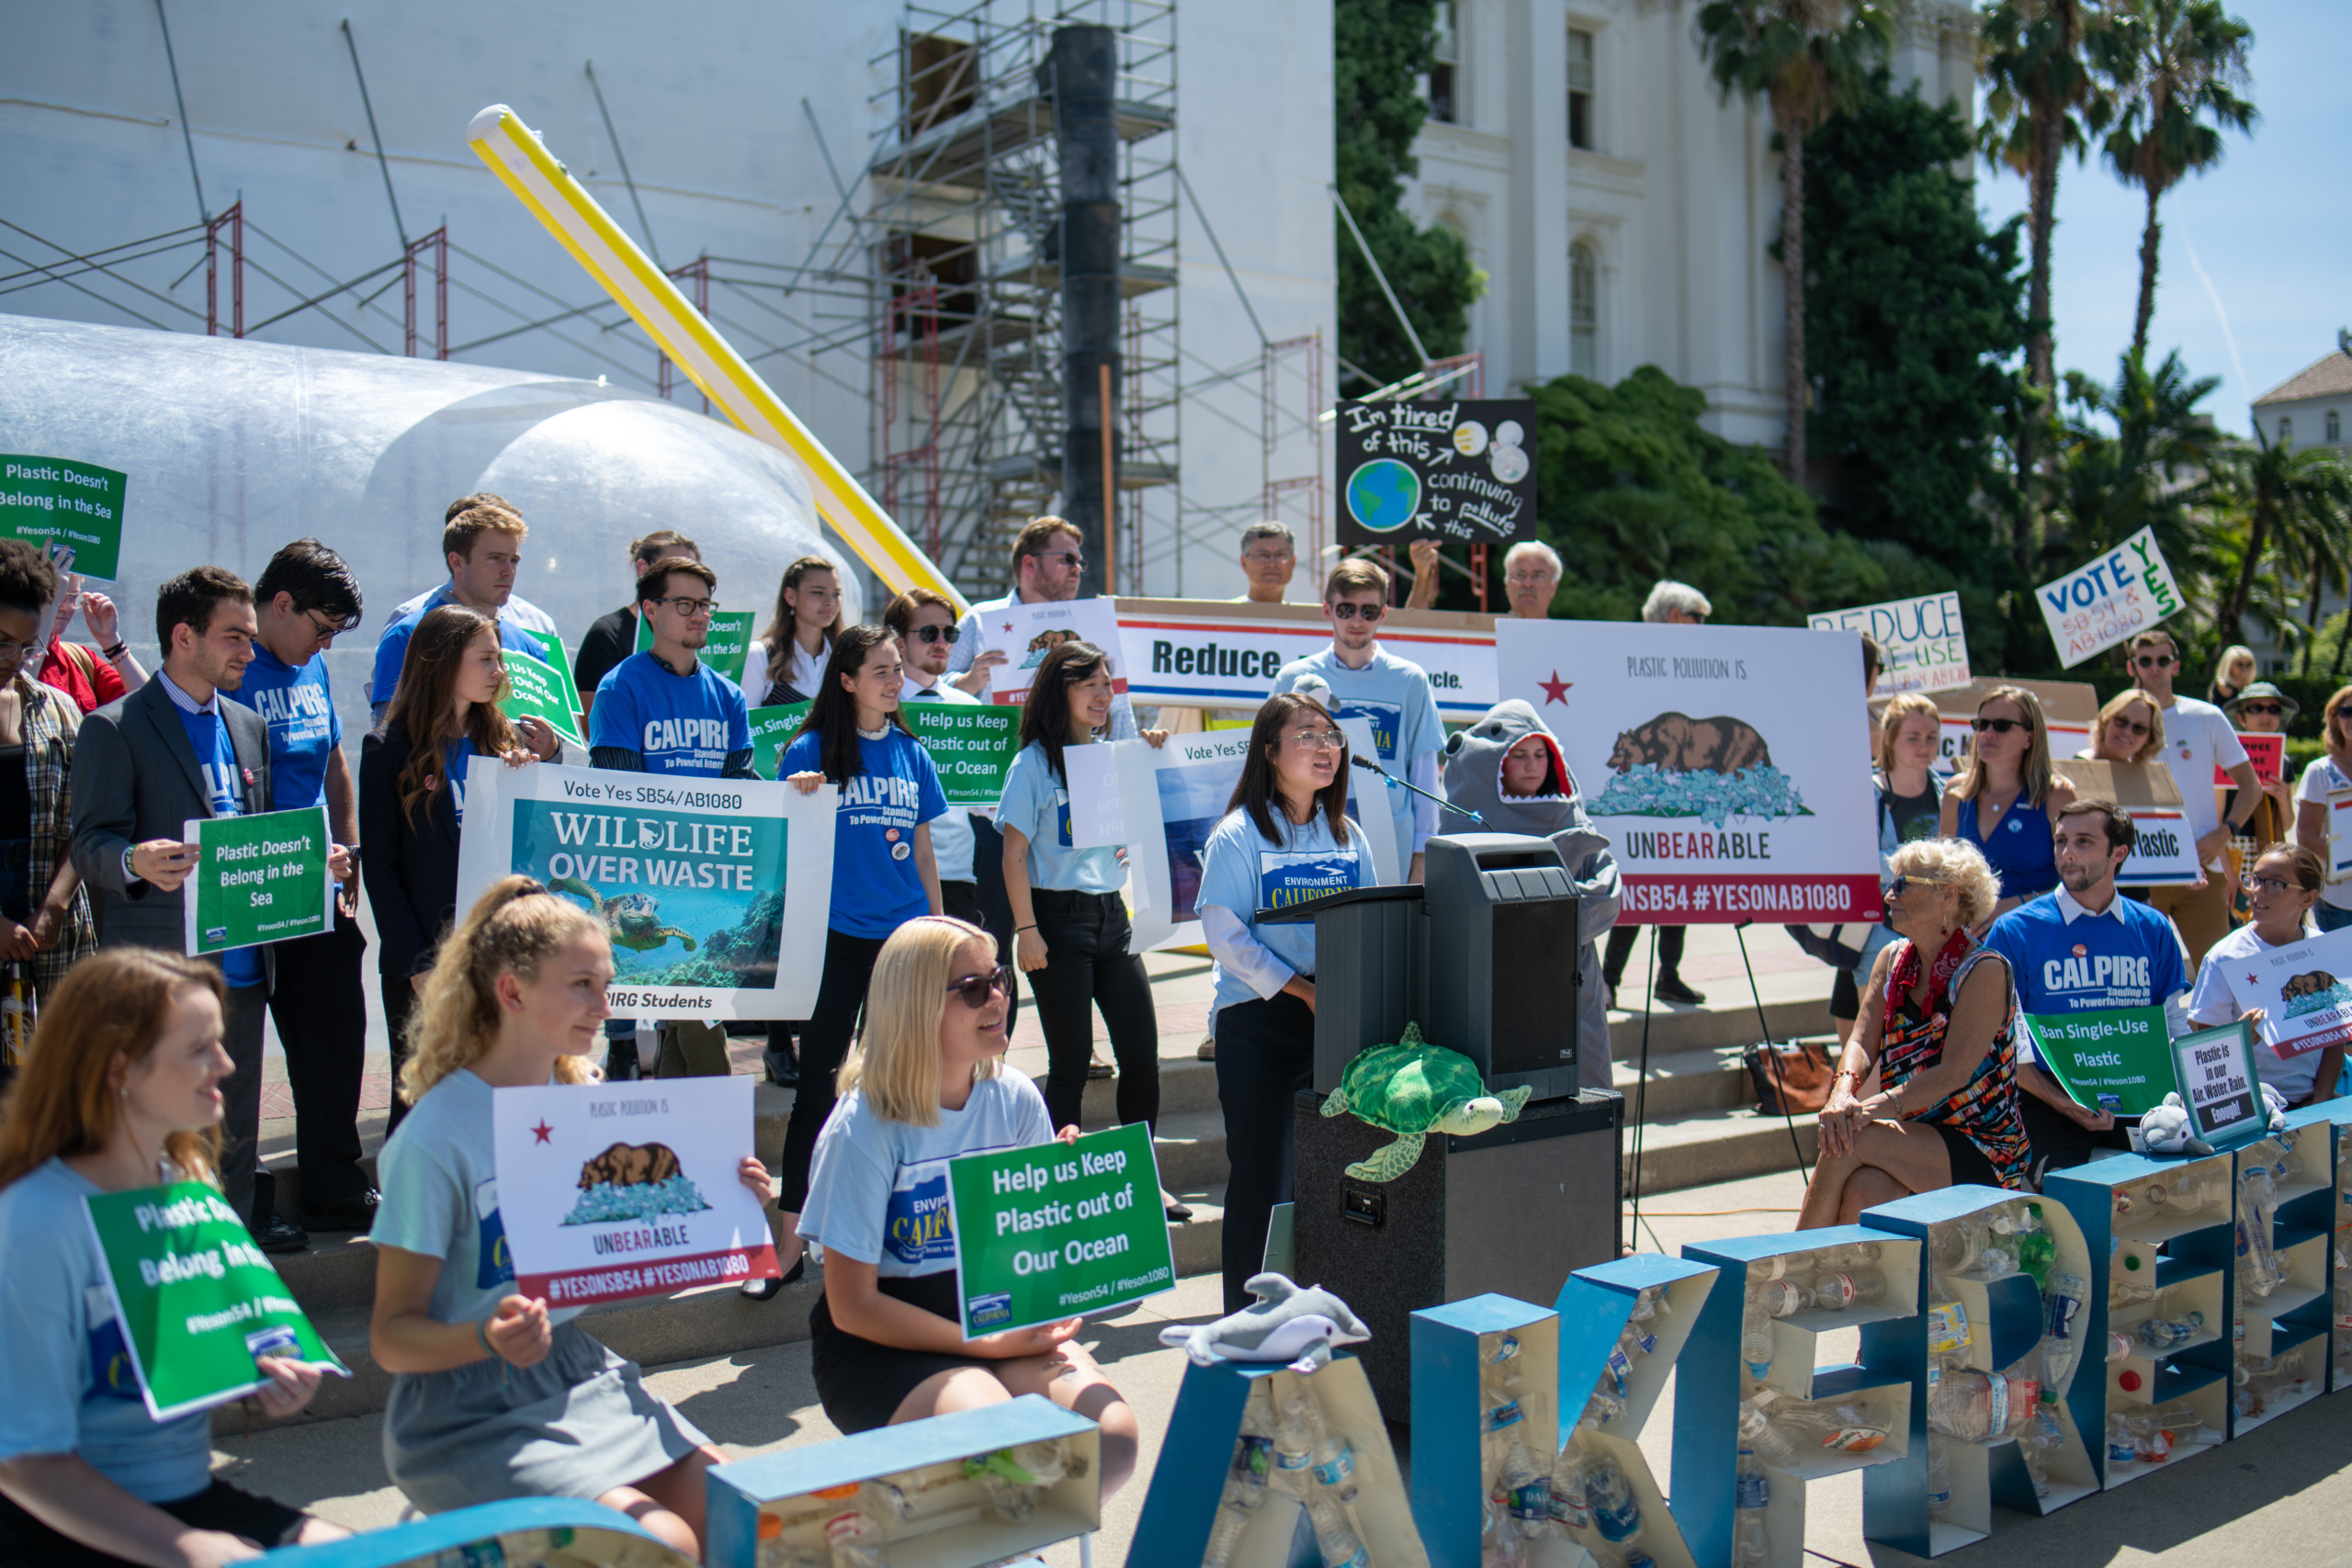 Environment California canvasser Valerie Nguyen speaks at a lobby day event in 2019 at the State Capitol. Photo credit: Ricky Mackie Photography.